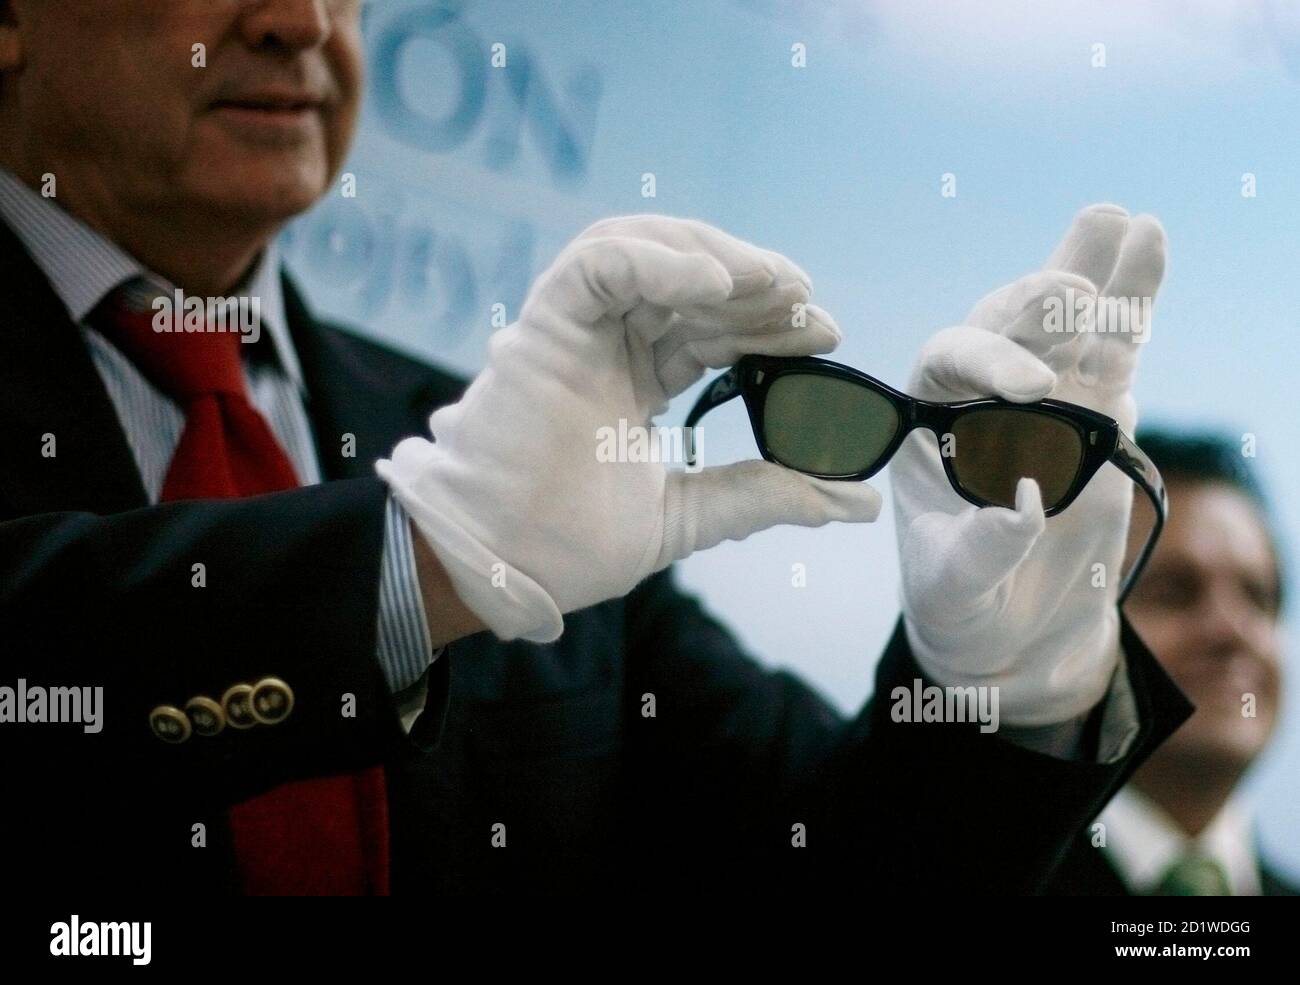 The sunglasses of late pope John Paul II are shown during a news conference  in Monterrey April 15, 2010. Over 150 personal objects from Pope John Paul  II will be exhibited for